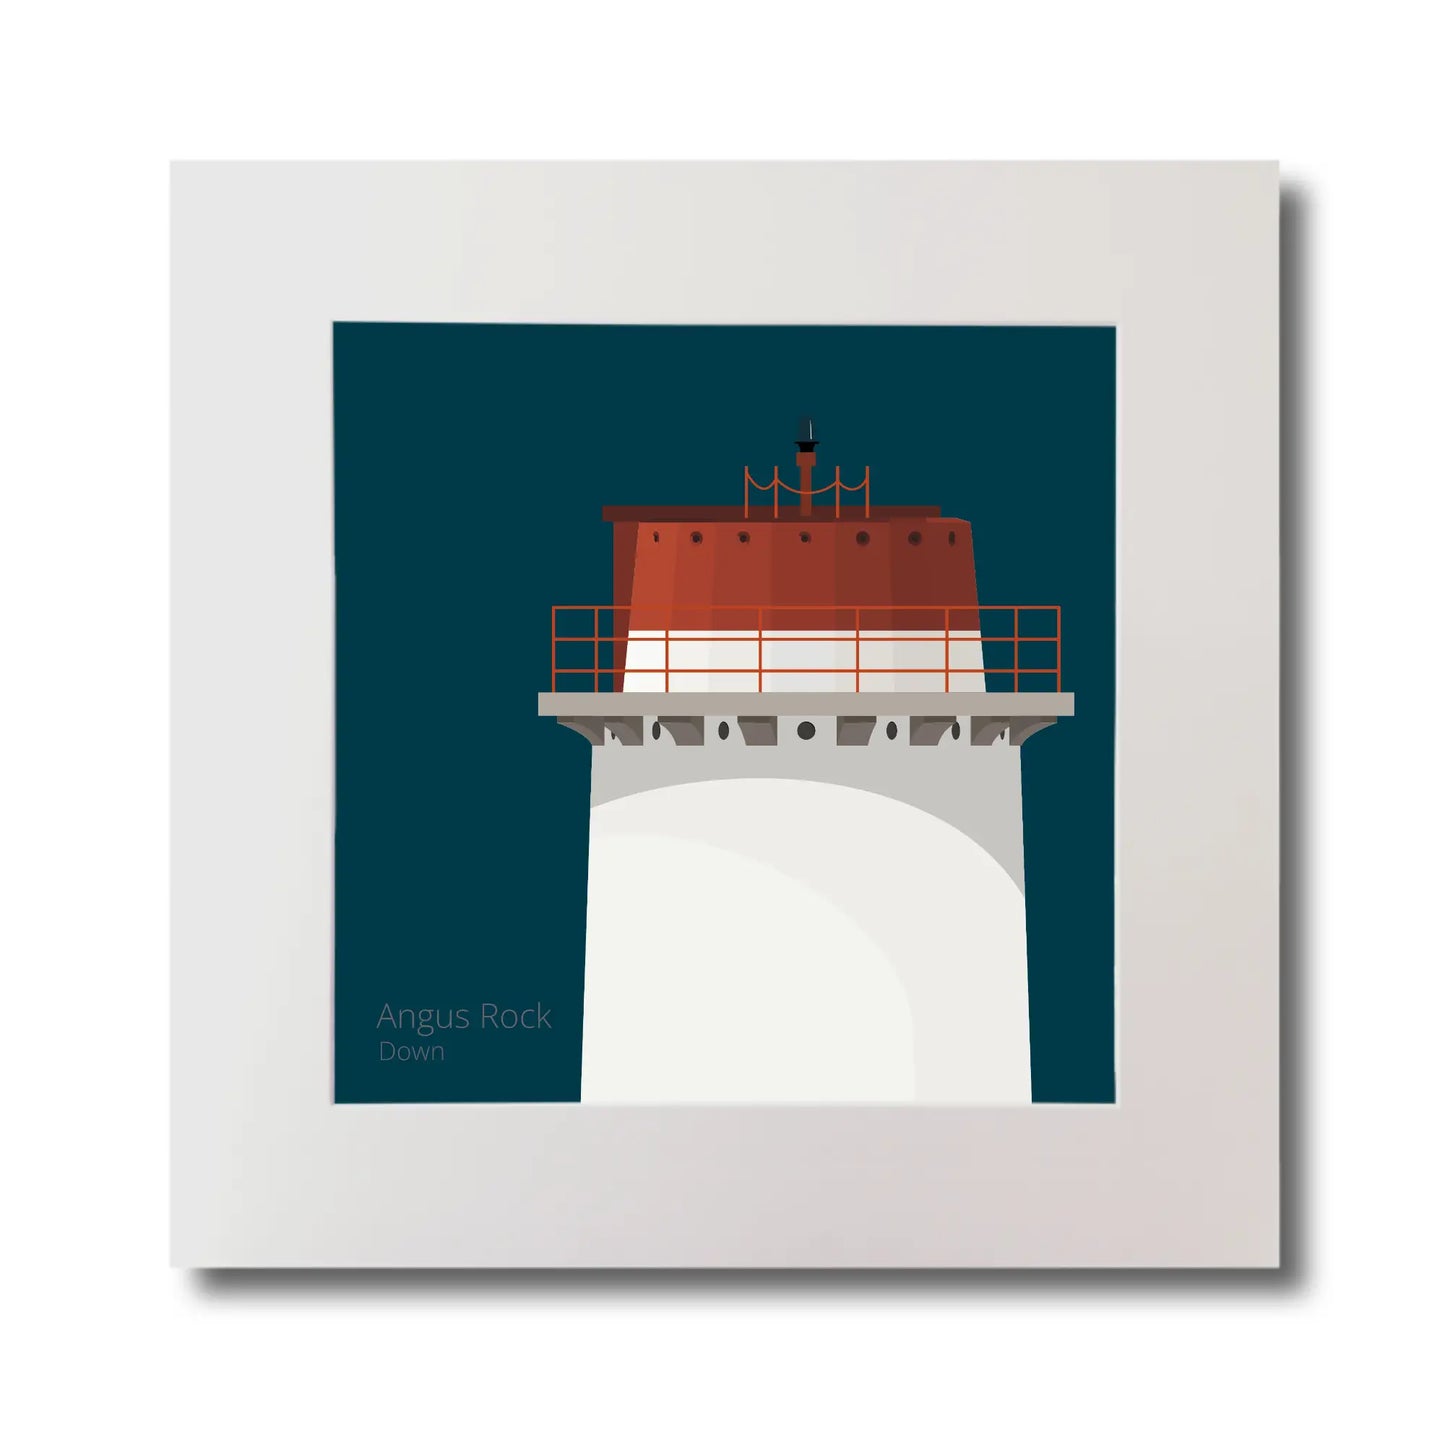 Illustration Angus Rock lighthouse on a midnight blue background, mounted and measuring 30x30cm.